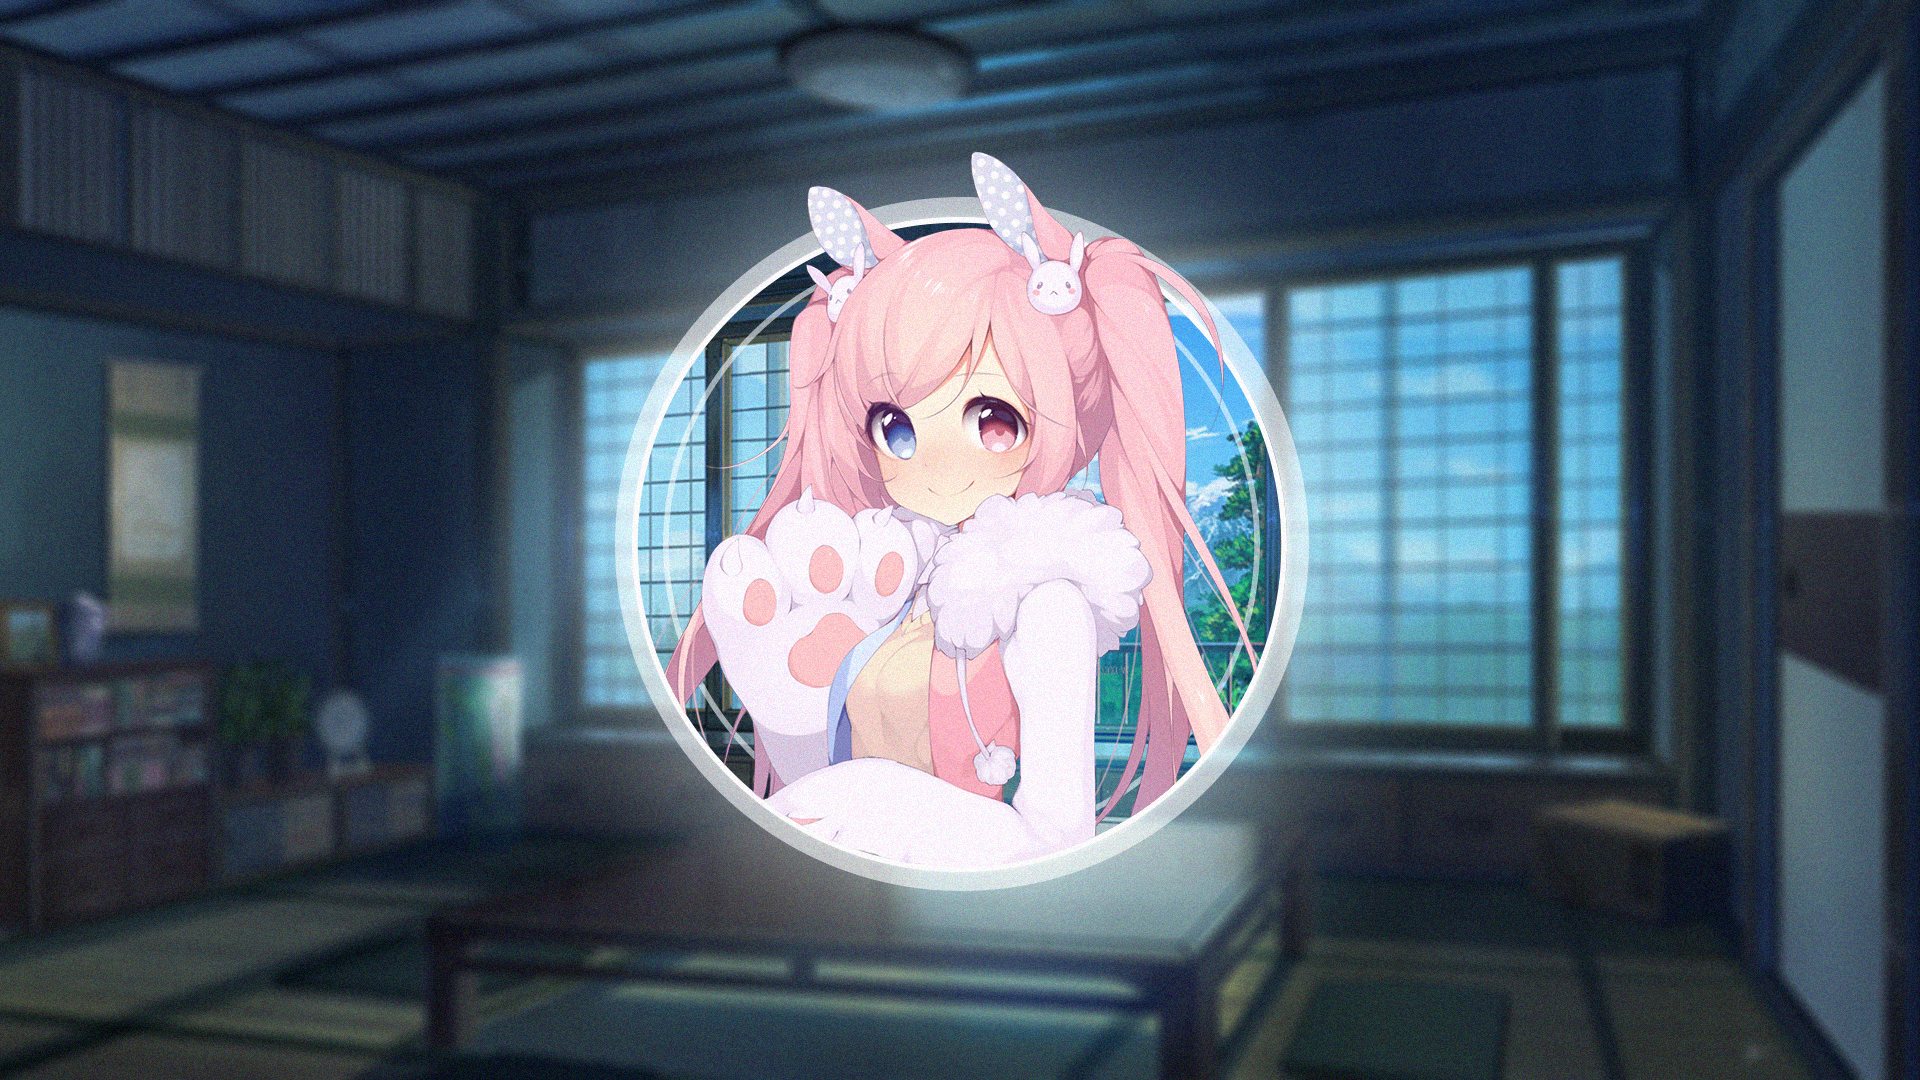 Anime 1920x1080 picture-in-picture anime anime girls bunny ears pink hair bunny girl bunny suit tie twintails loli 2D heterochromia paws